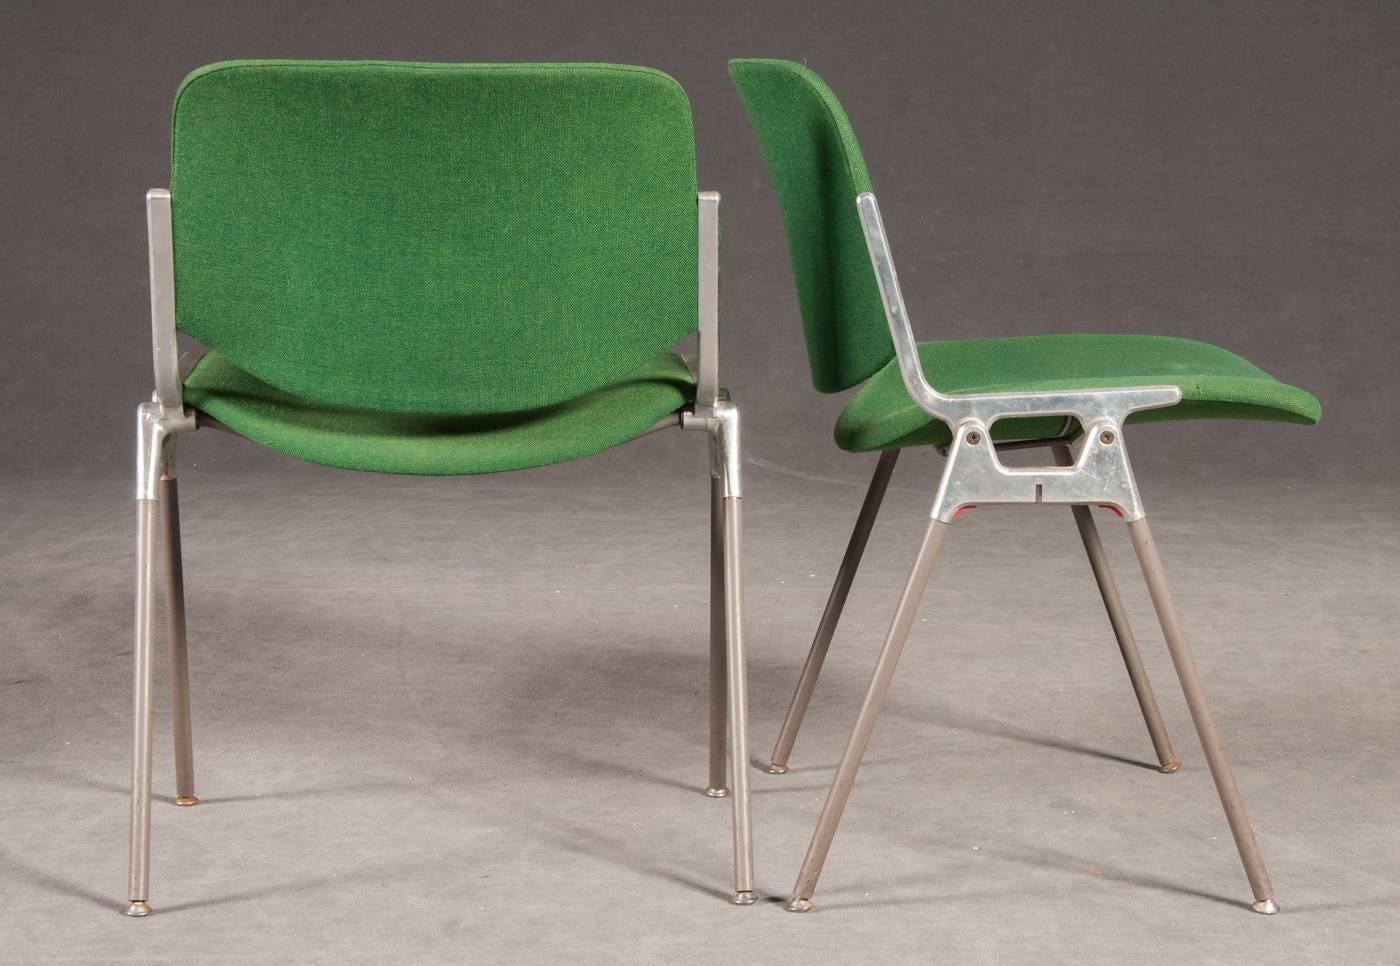 Frame made of cast aluminium frame, upholstered seat and back, covered with green fabric, still in original condition.
Frame with patina and scratches.
Upto 16 available.